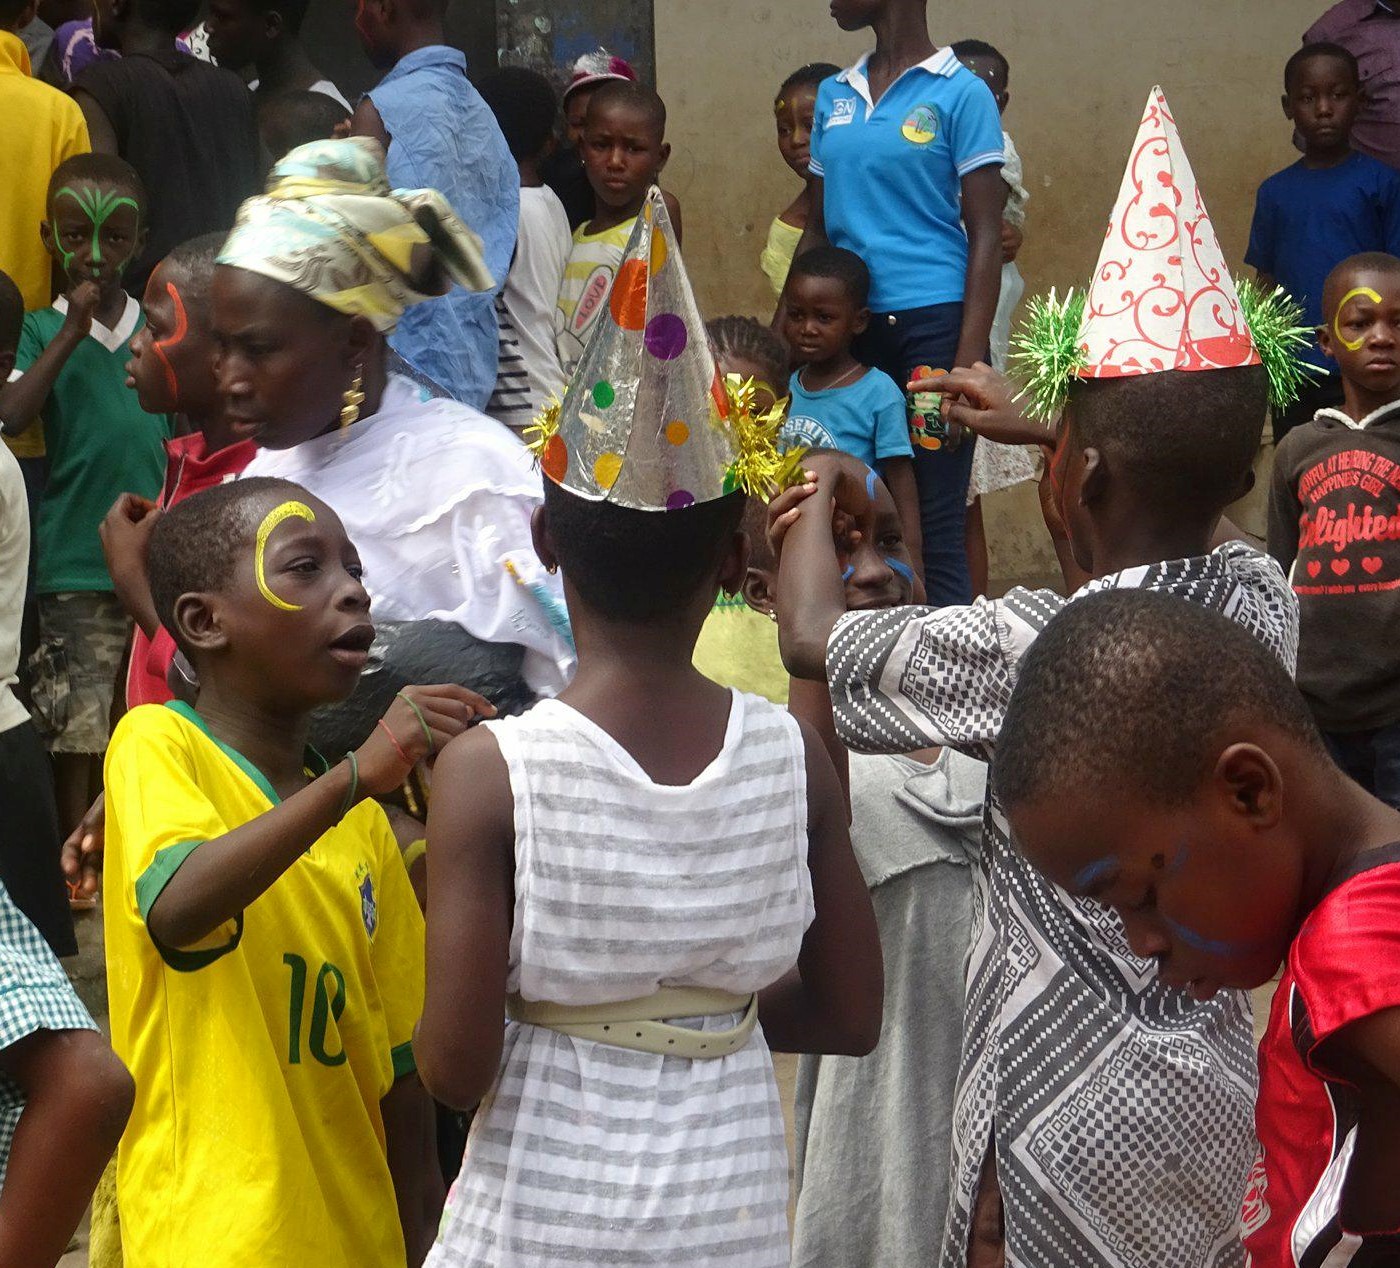 A group of children with party hats on